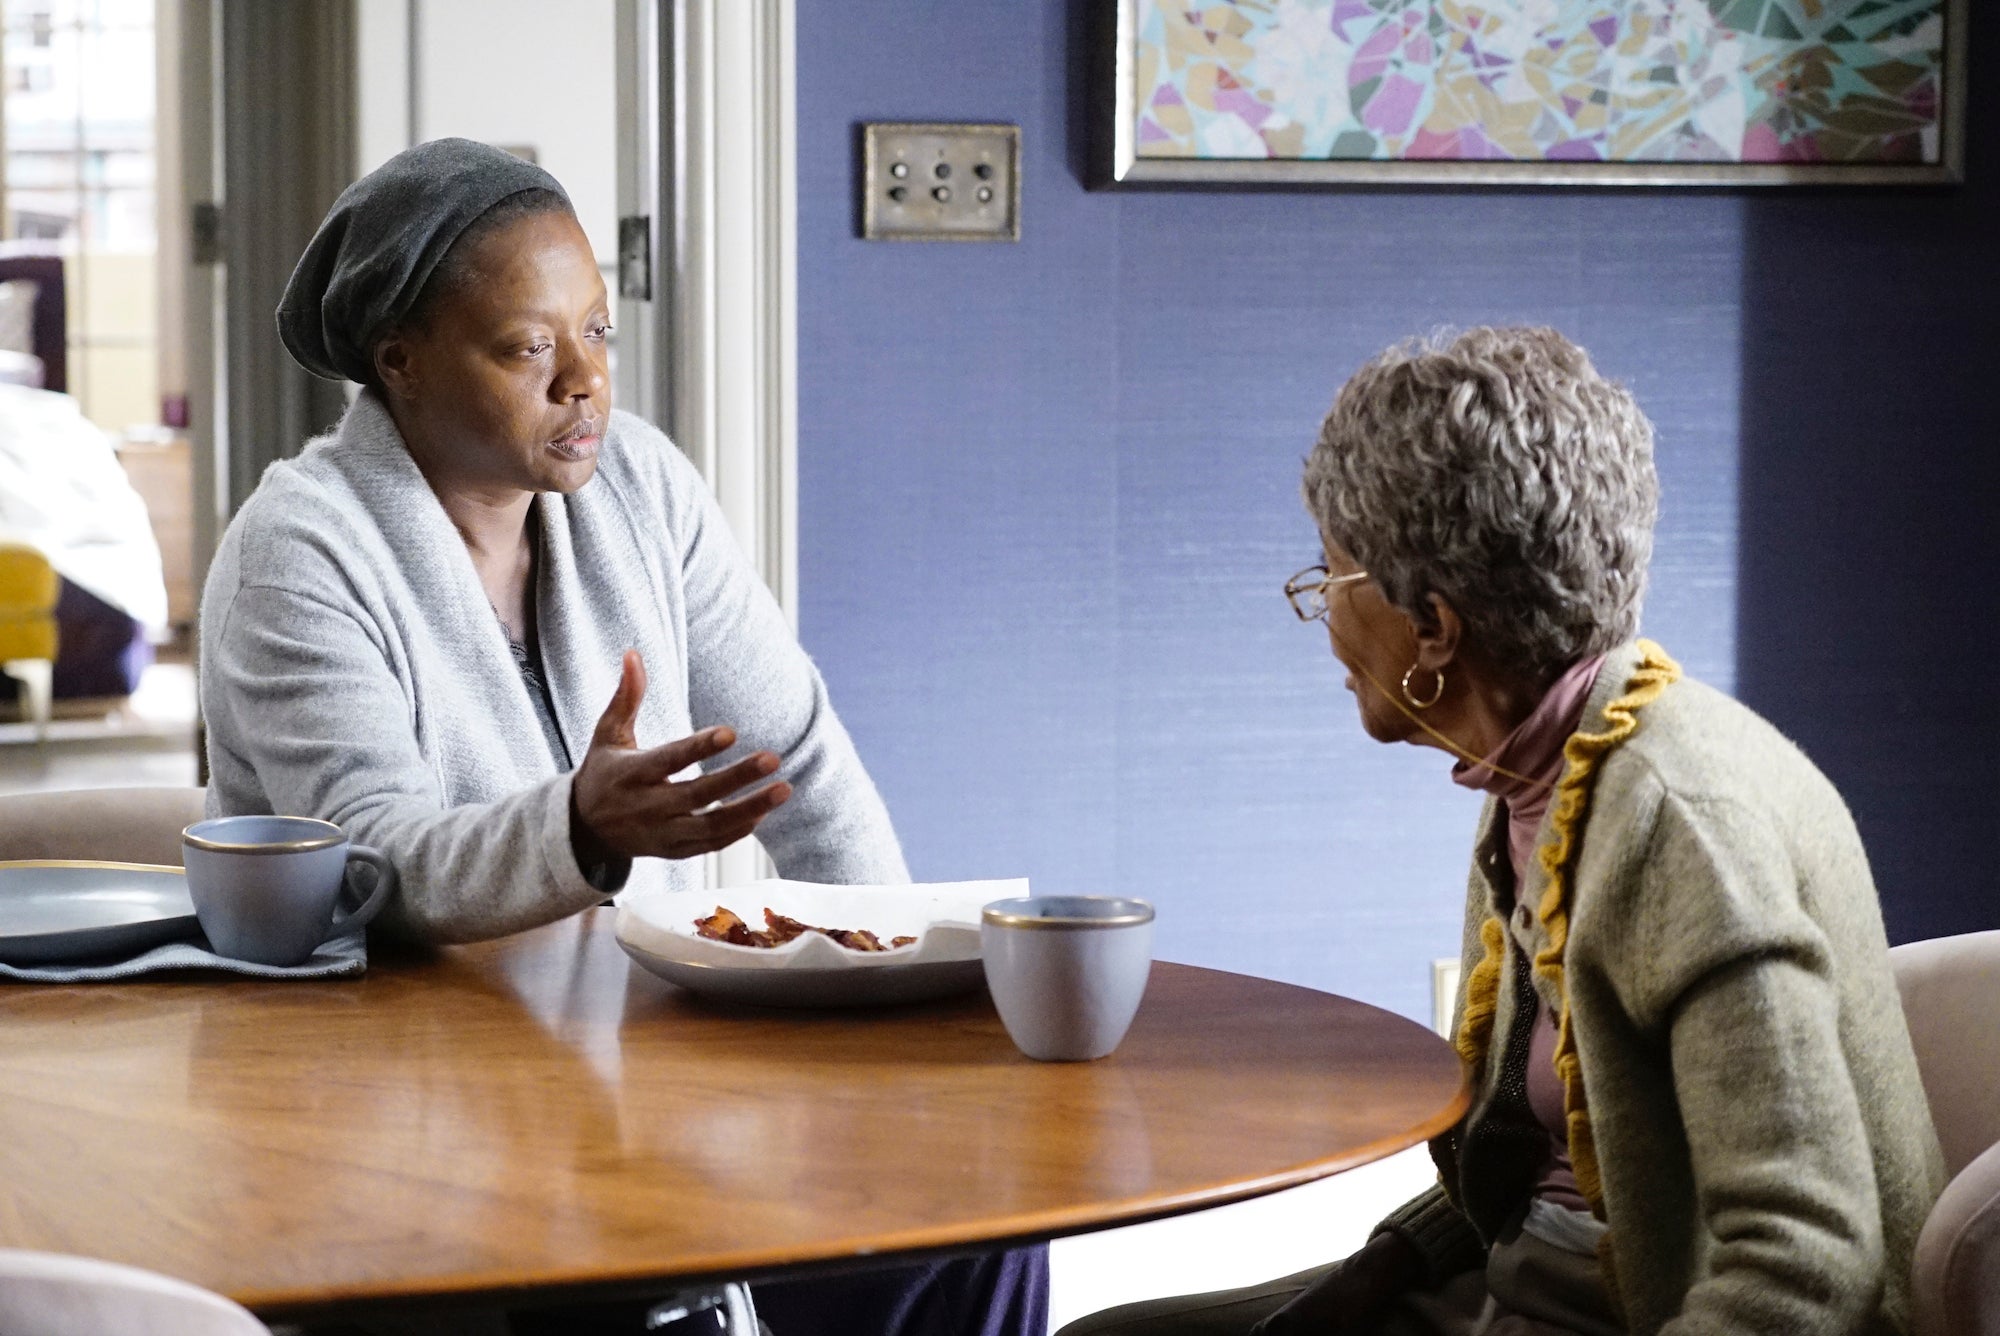 Your First Look At Cicely Tyson's Final Appearance On 'How To Get Away With Murder'